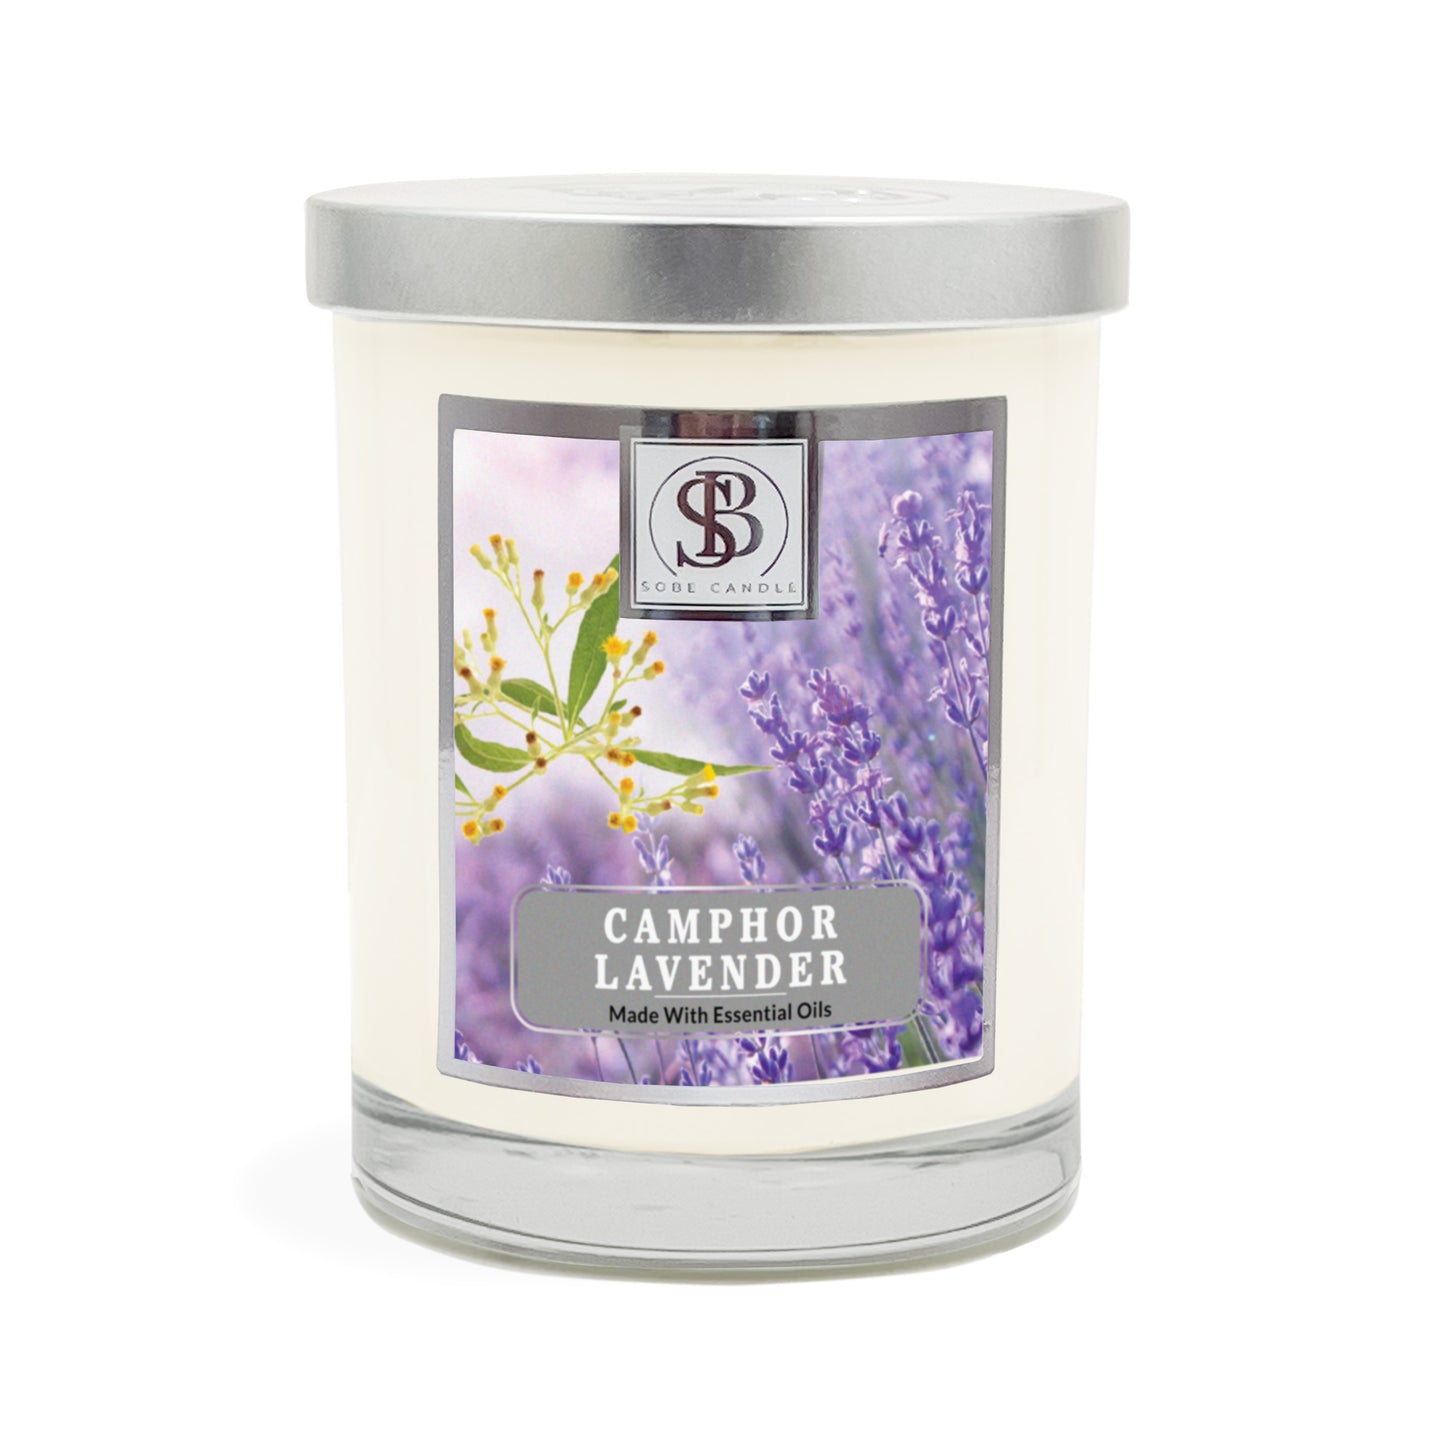 CAMPHOR LAVENDER | Soy Scented Candle 11 oz